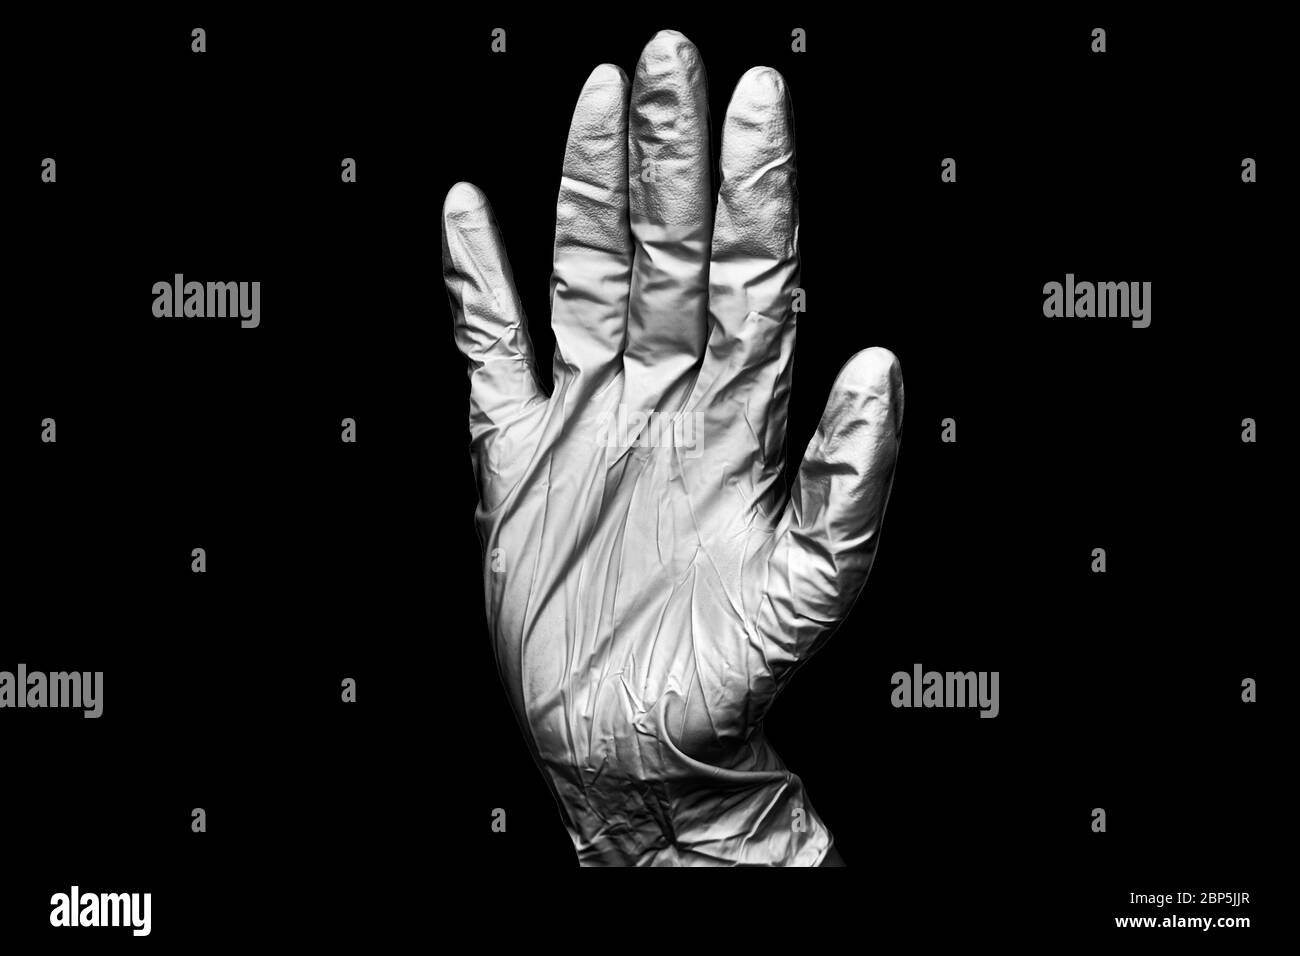 Human hand in white rubber medical glove on black background isolated close up, one surgeon hand in latex protective glove, doctor's hand in glove Stock Photo